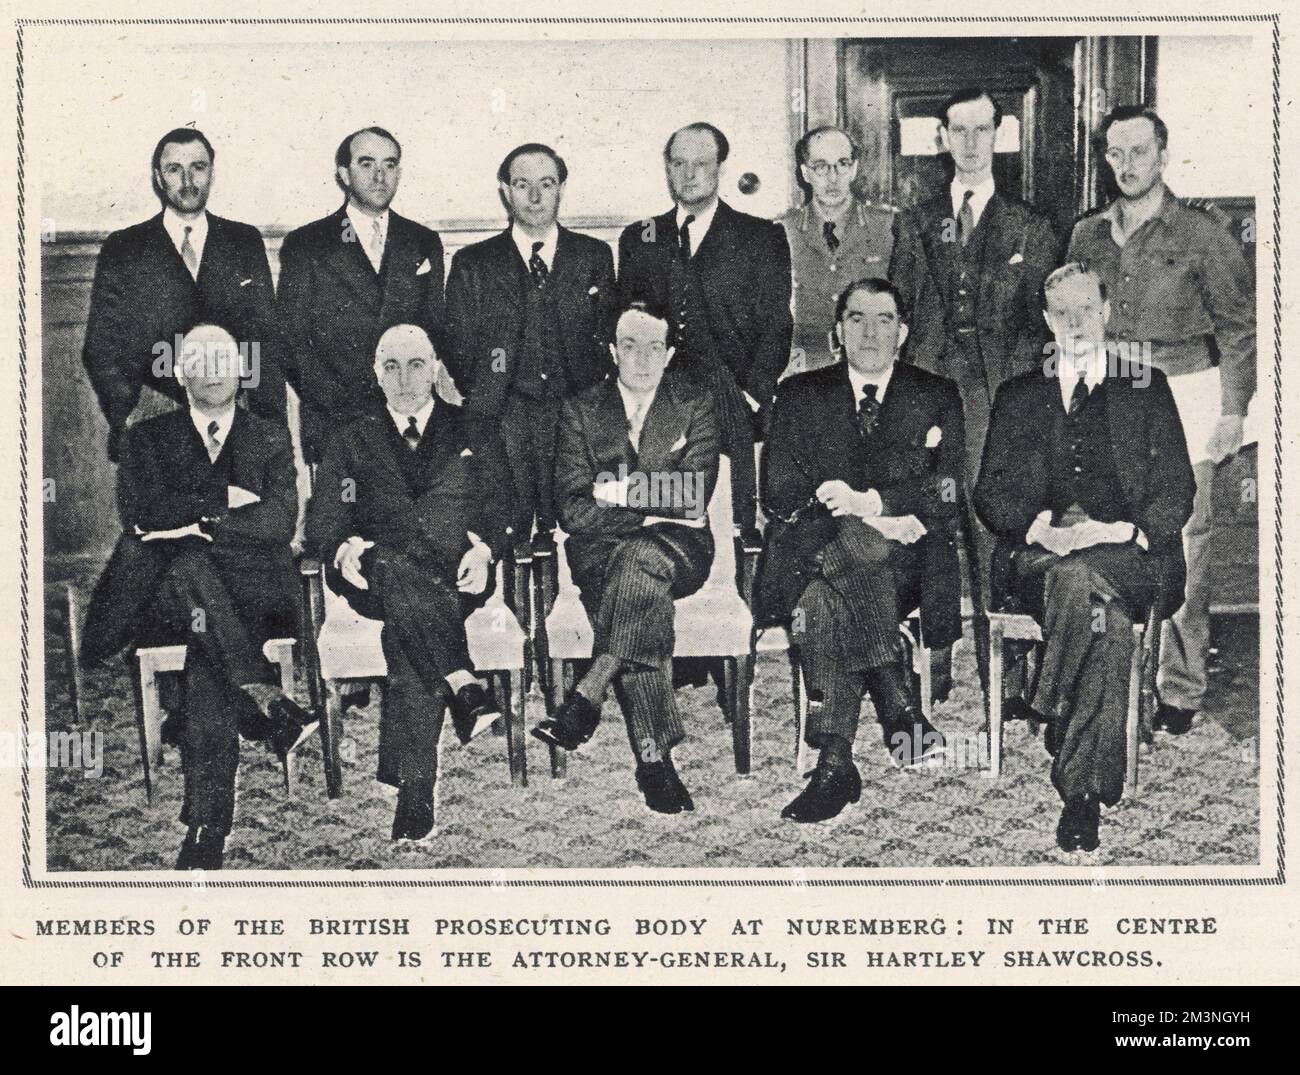 The members of the British prosecuting body at Nuremberg: in the centre of the front row is the attorney-general, Sir Hartley Shawcross. The Nuremberg trials were a series of military tribunals which prosecuted members of the defeated Nazi party. They were held at the Palace of Justice in Nuremberg, Germany, between 1945-1946.     Date: 1945 Stock Photo